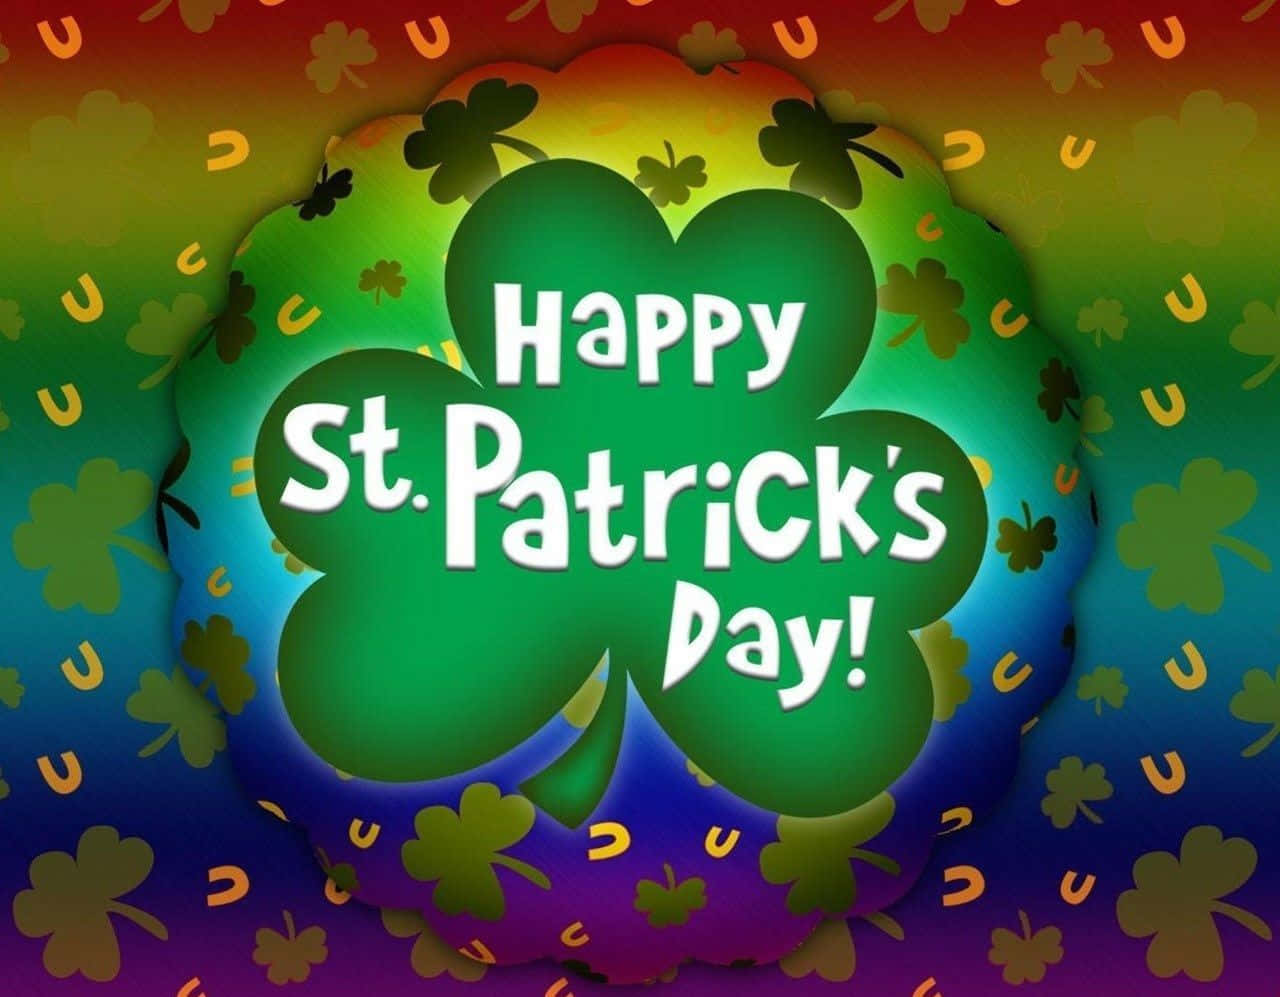 A festive Saint Patrick's Day background with a leprechaun, gold coins, and shamrocks